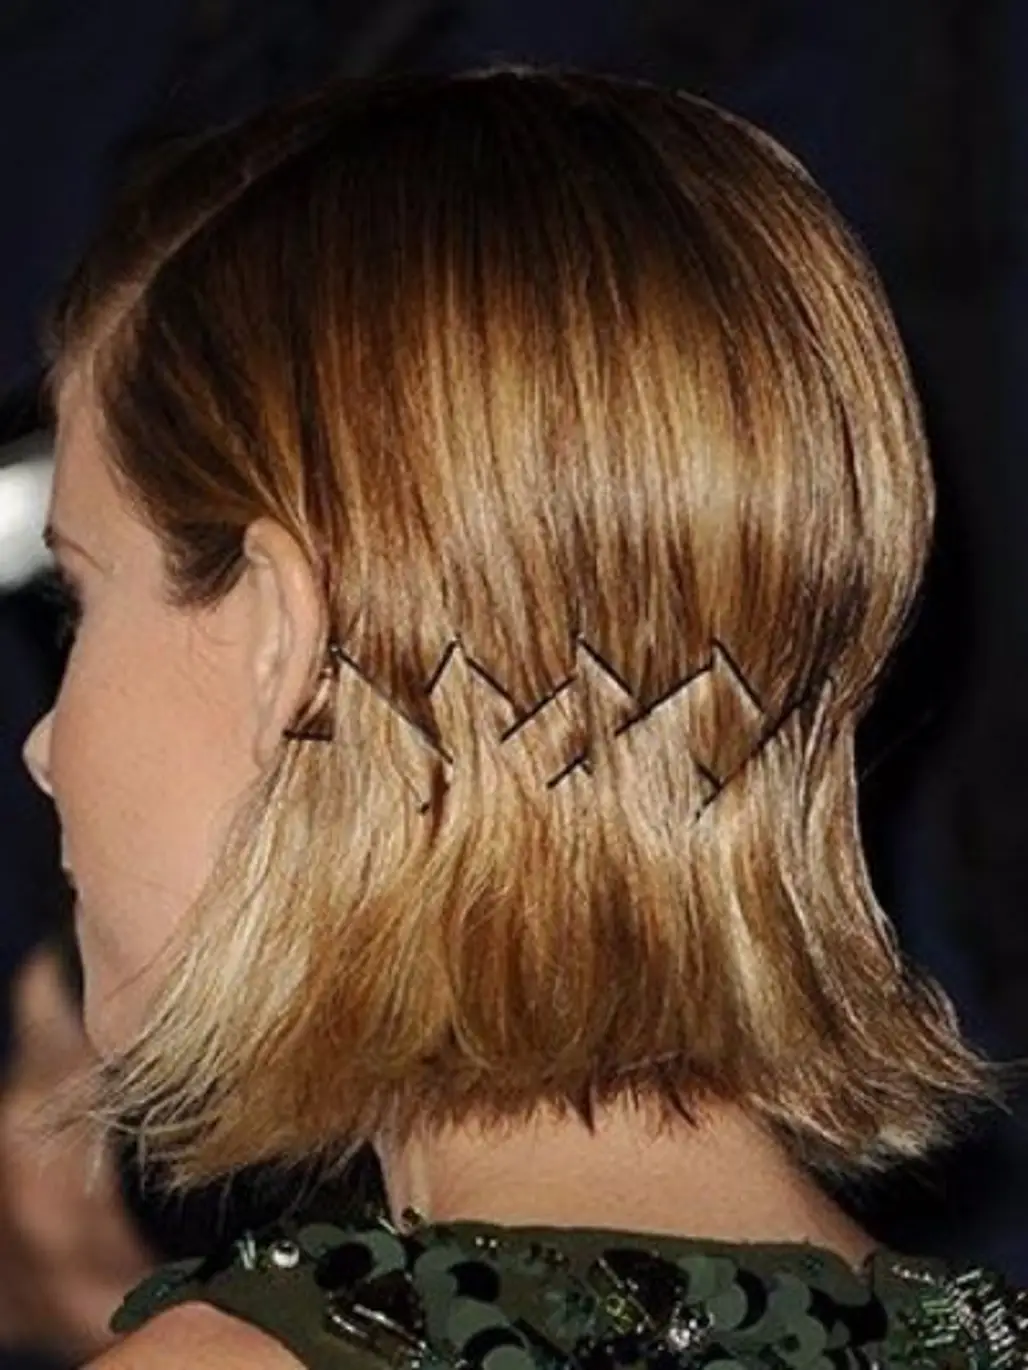 Get Creative with Bobby Pins